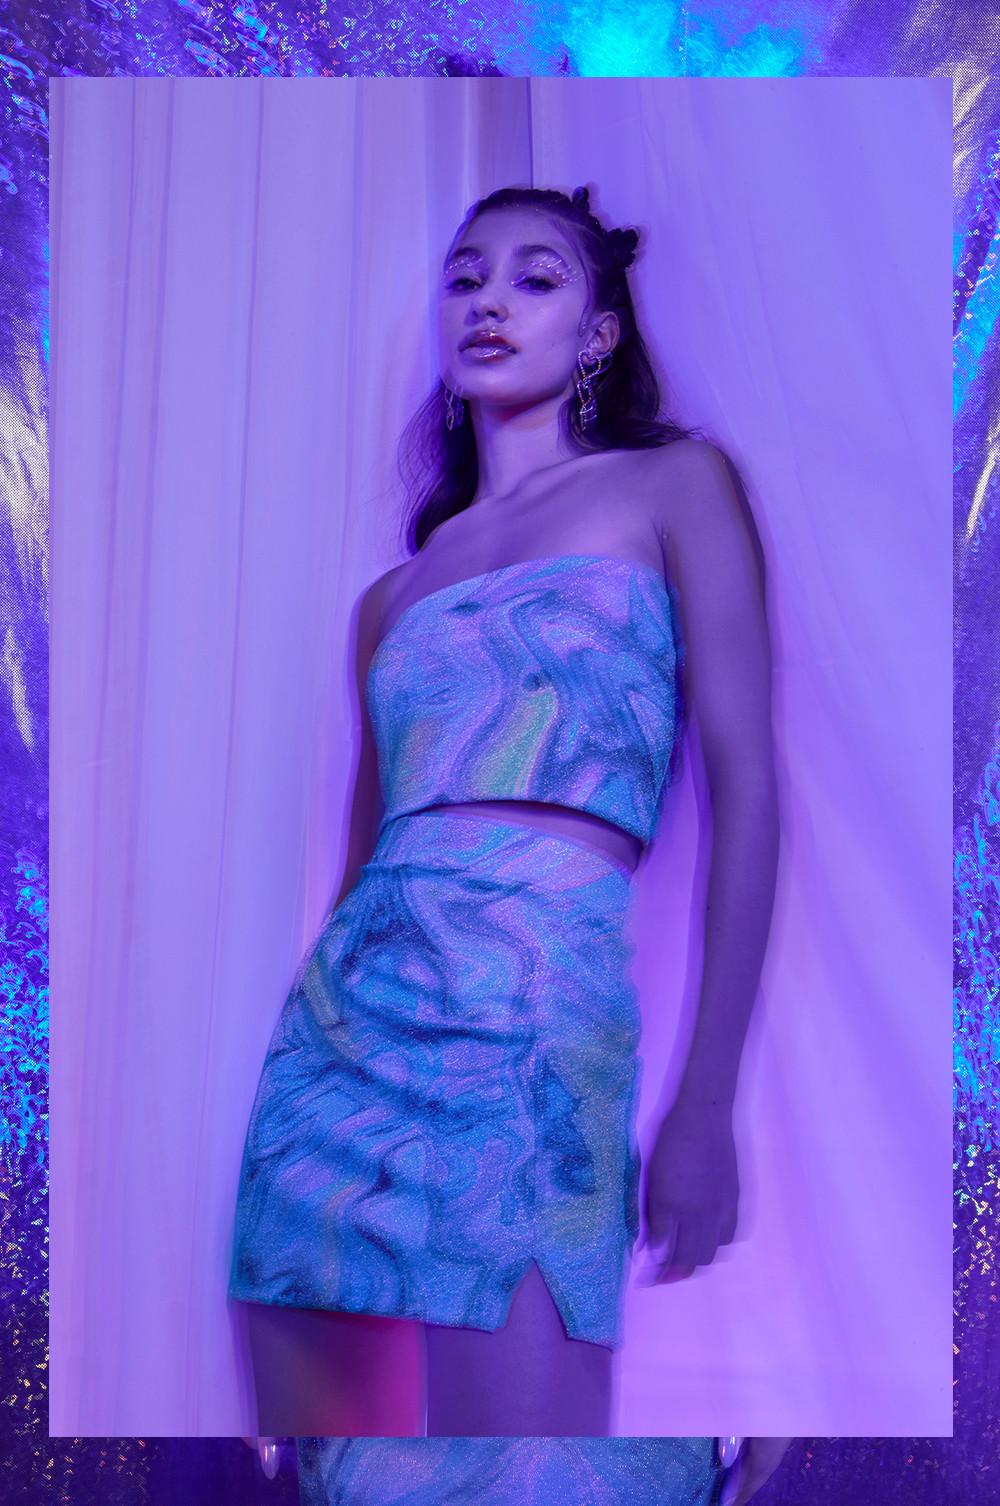 model wears swirl printed coord, with strapless crop top and mini skirt with slit